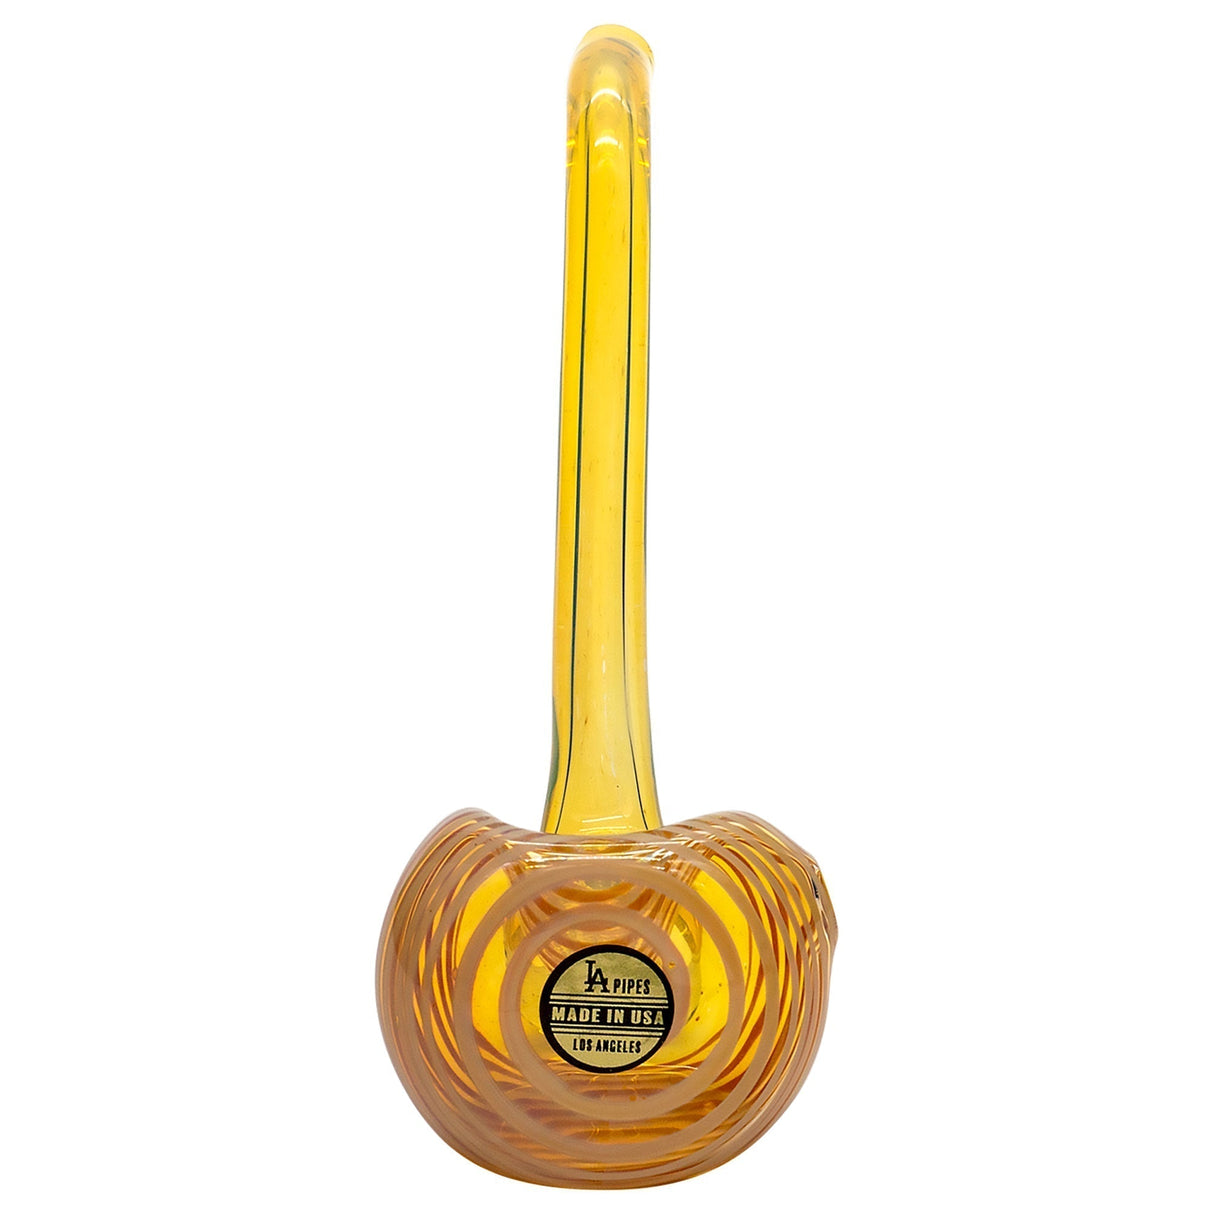 LA Pipes Spoon Hand Pipe in Amber, Durable Borosilicate Glass, Front View on White Background